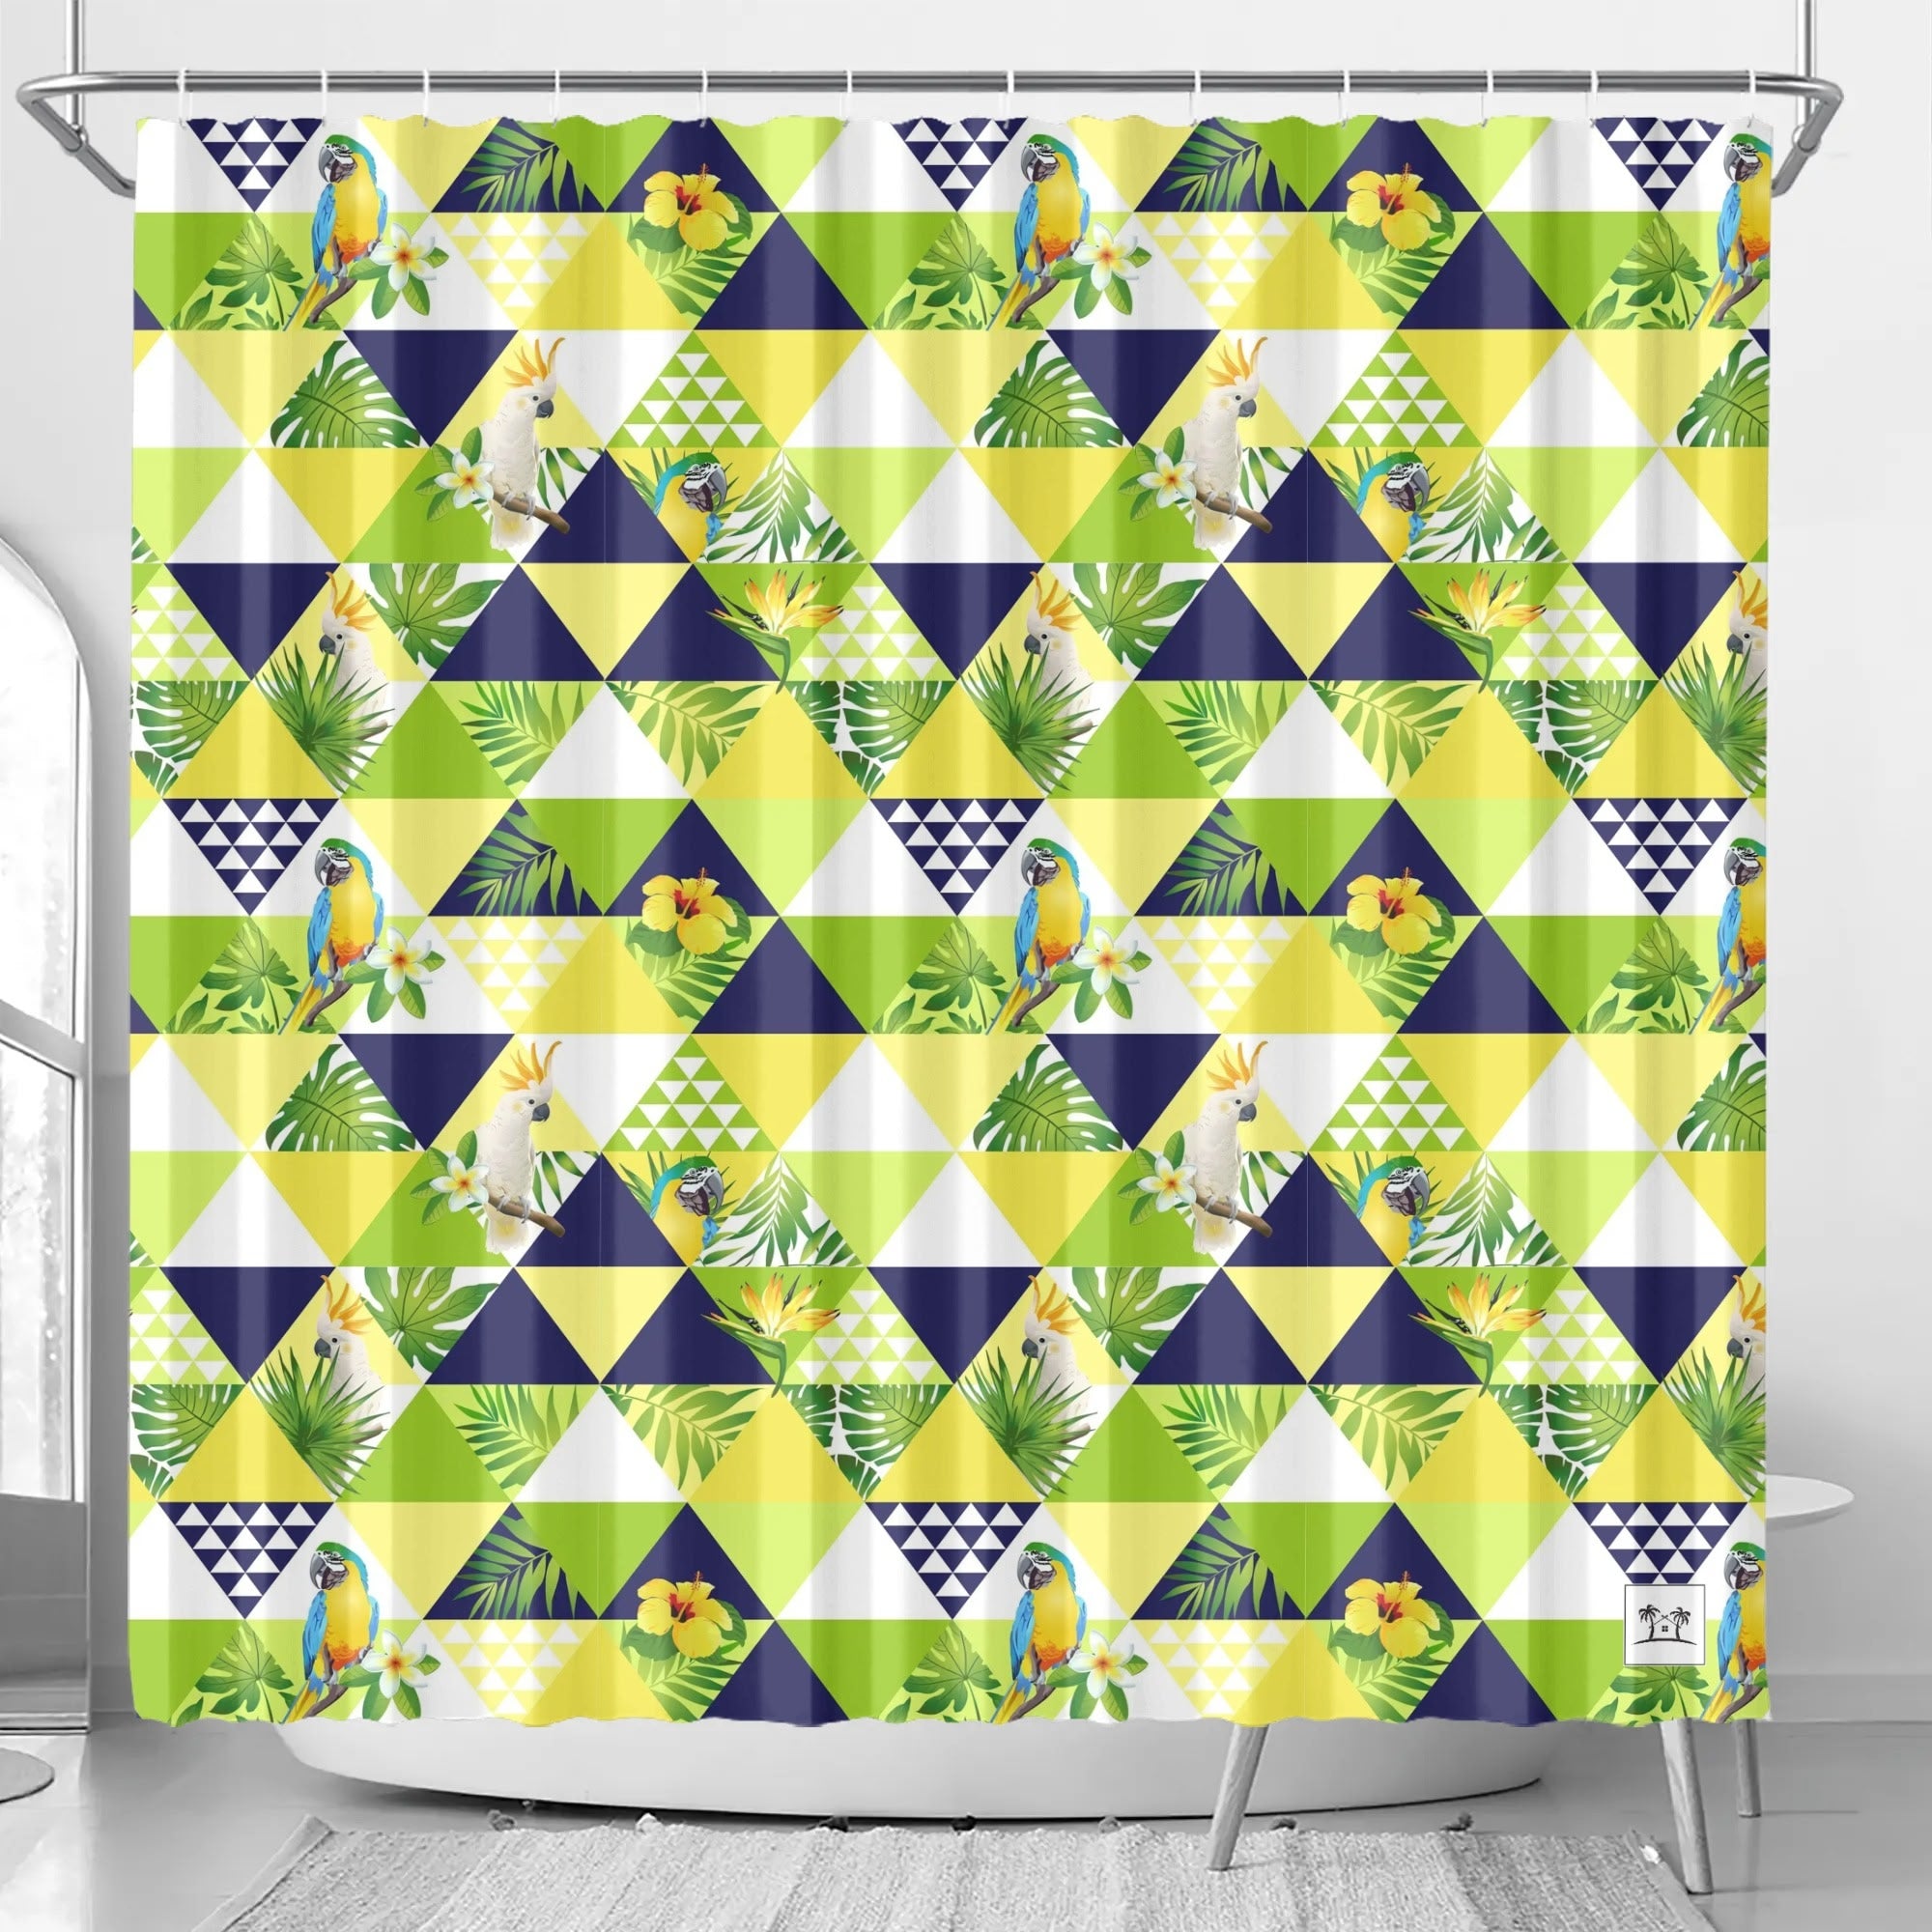 Waterproof Shower Curtain - Tropical Triangles